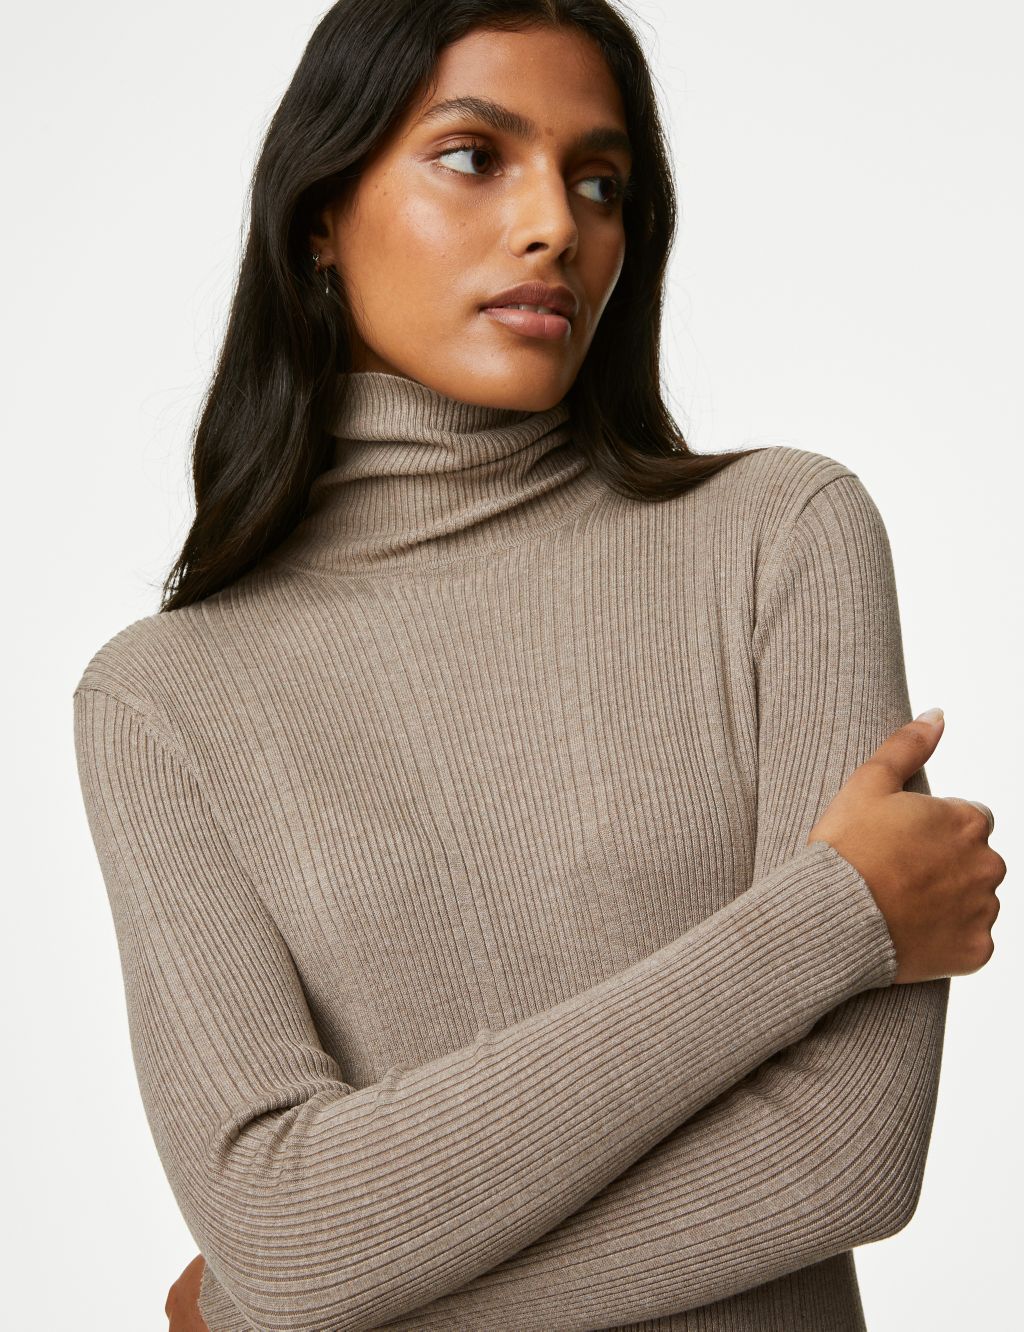 Knitted Ribbed Roll Neck Midi Dress image 3